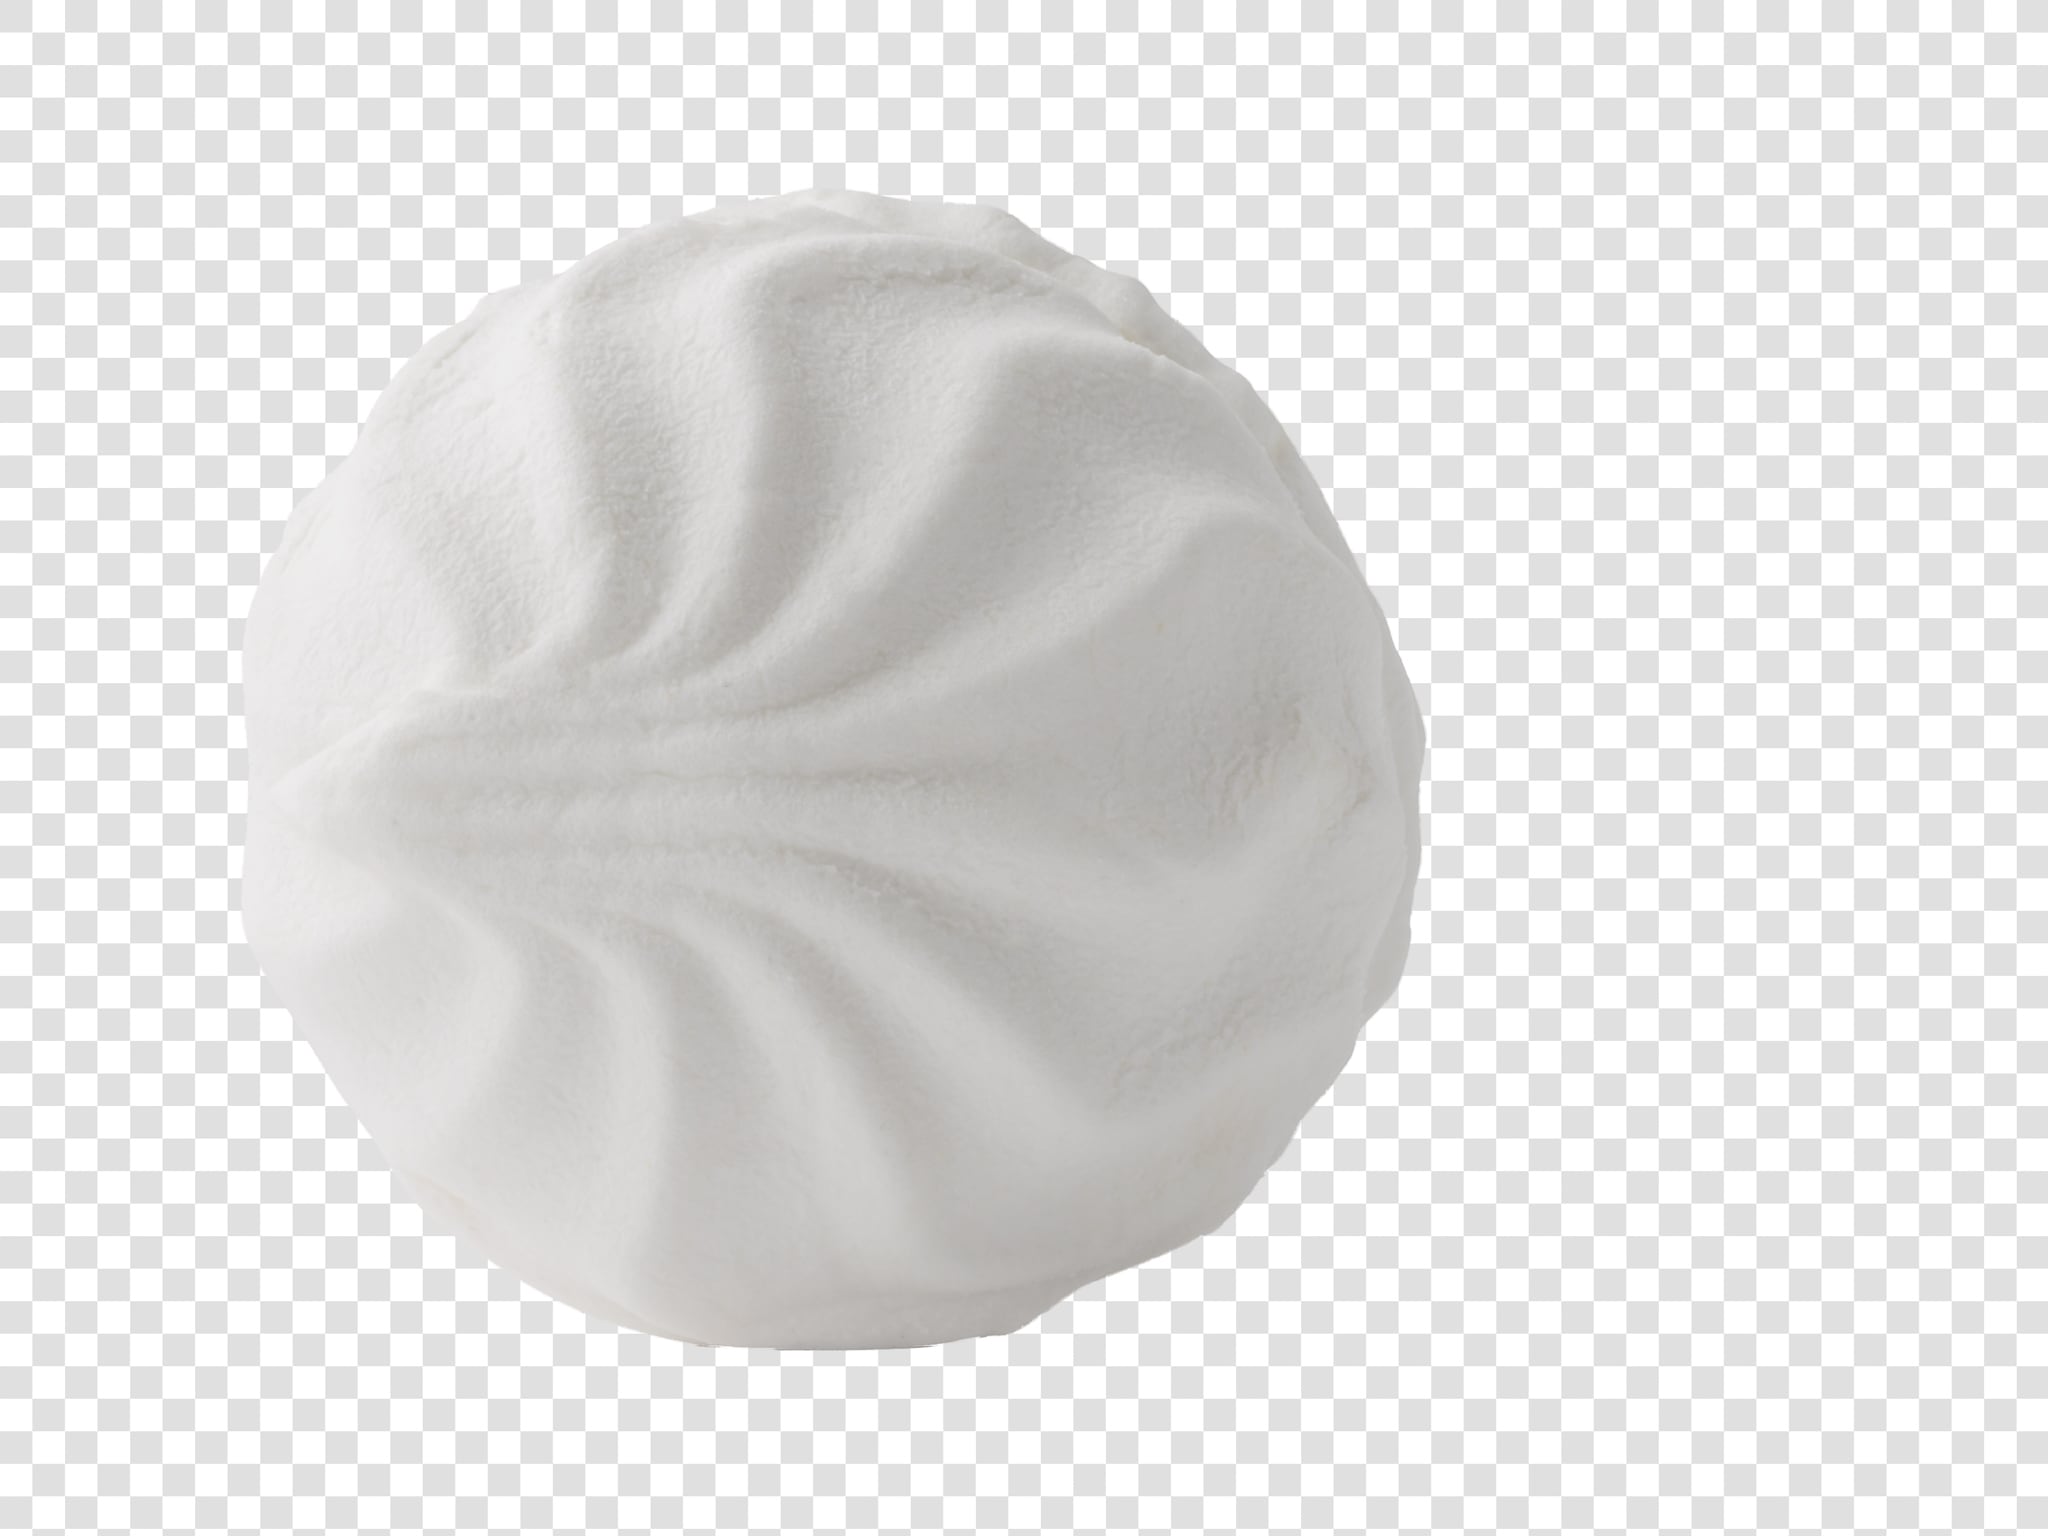 Marshmallow PSD image with transparent background